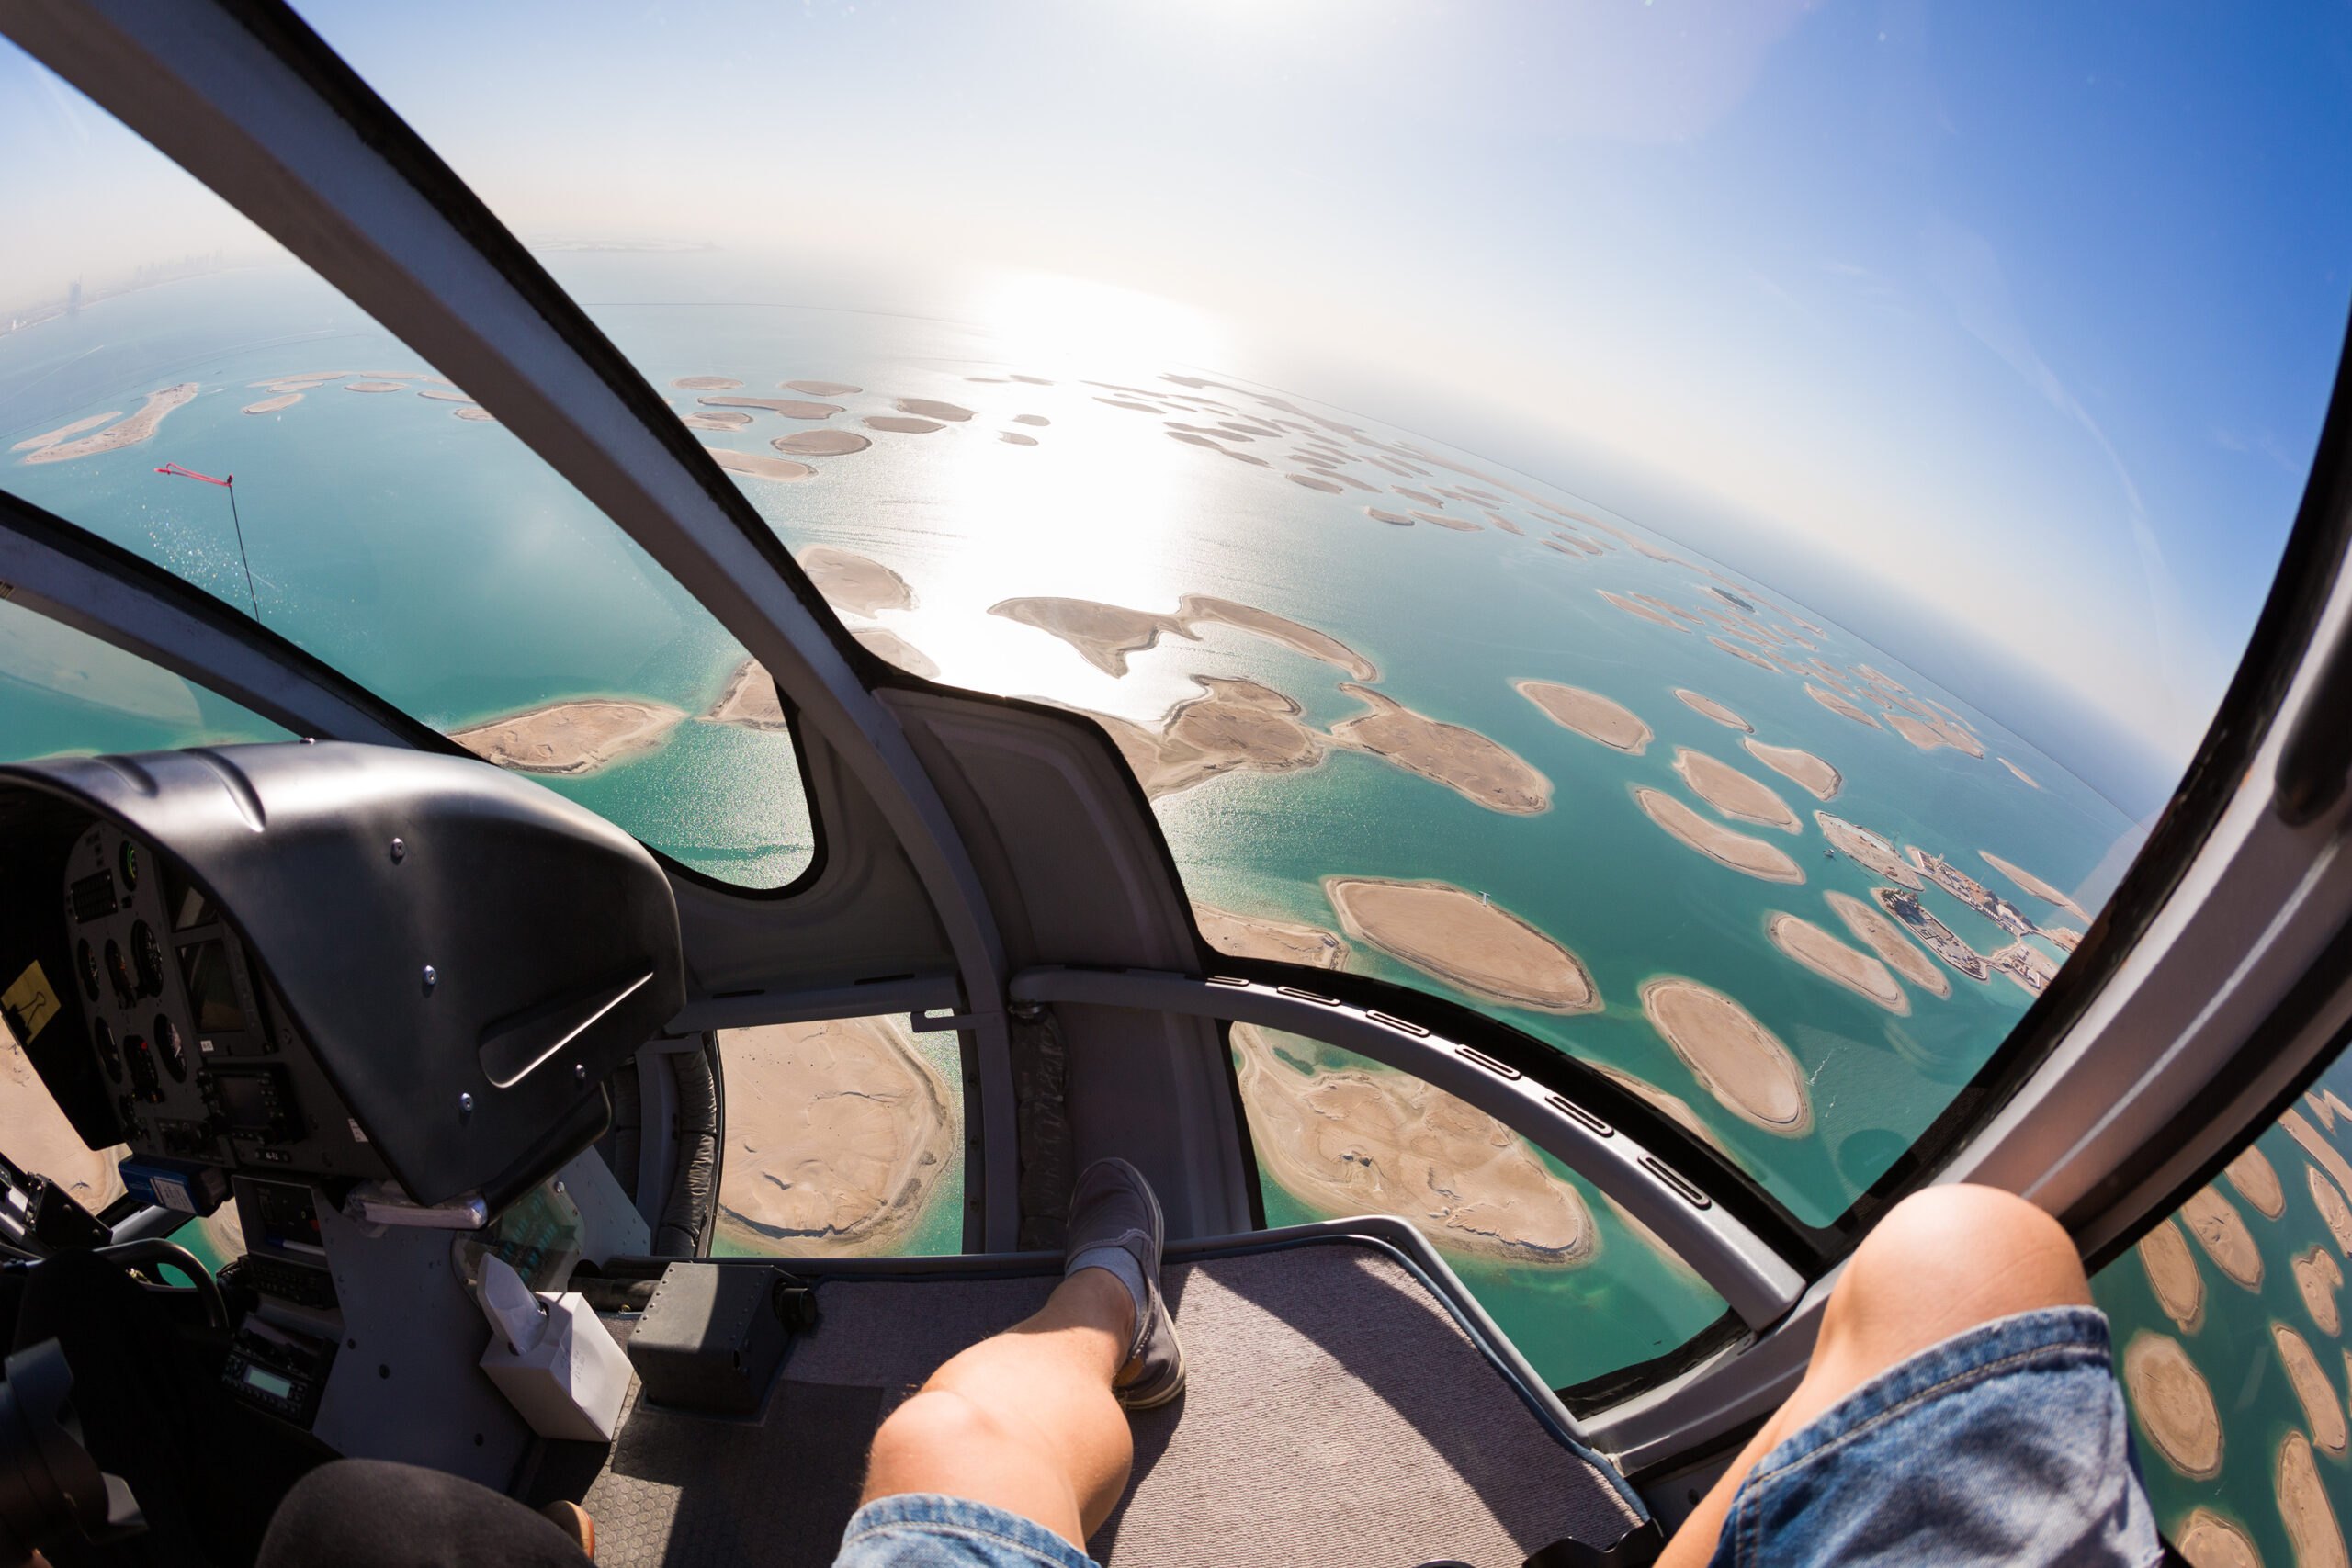 Best Dubai helicopter tours - View from the helicopter